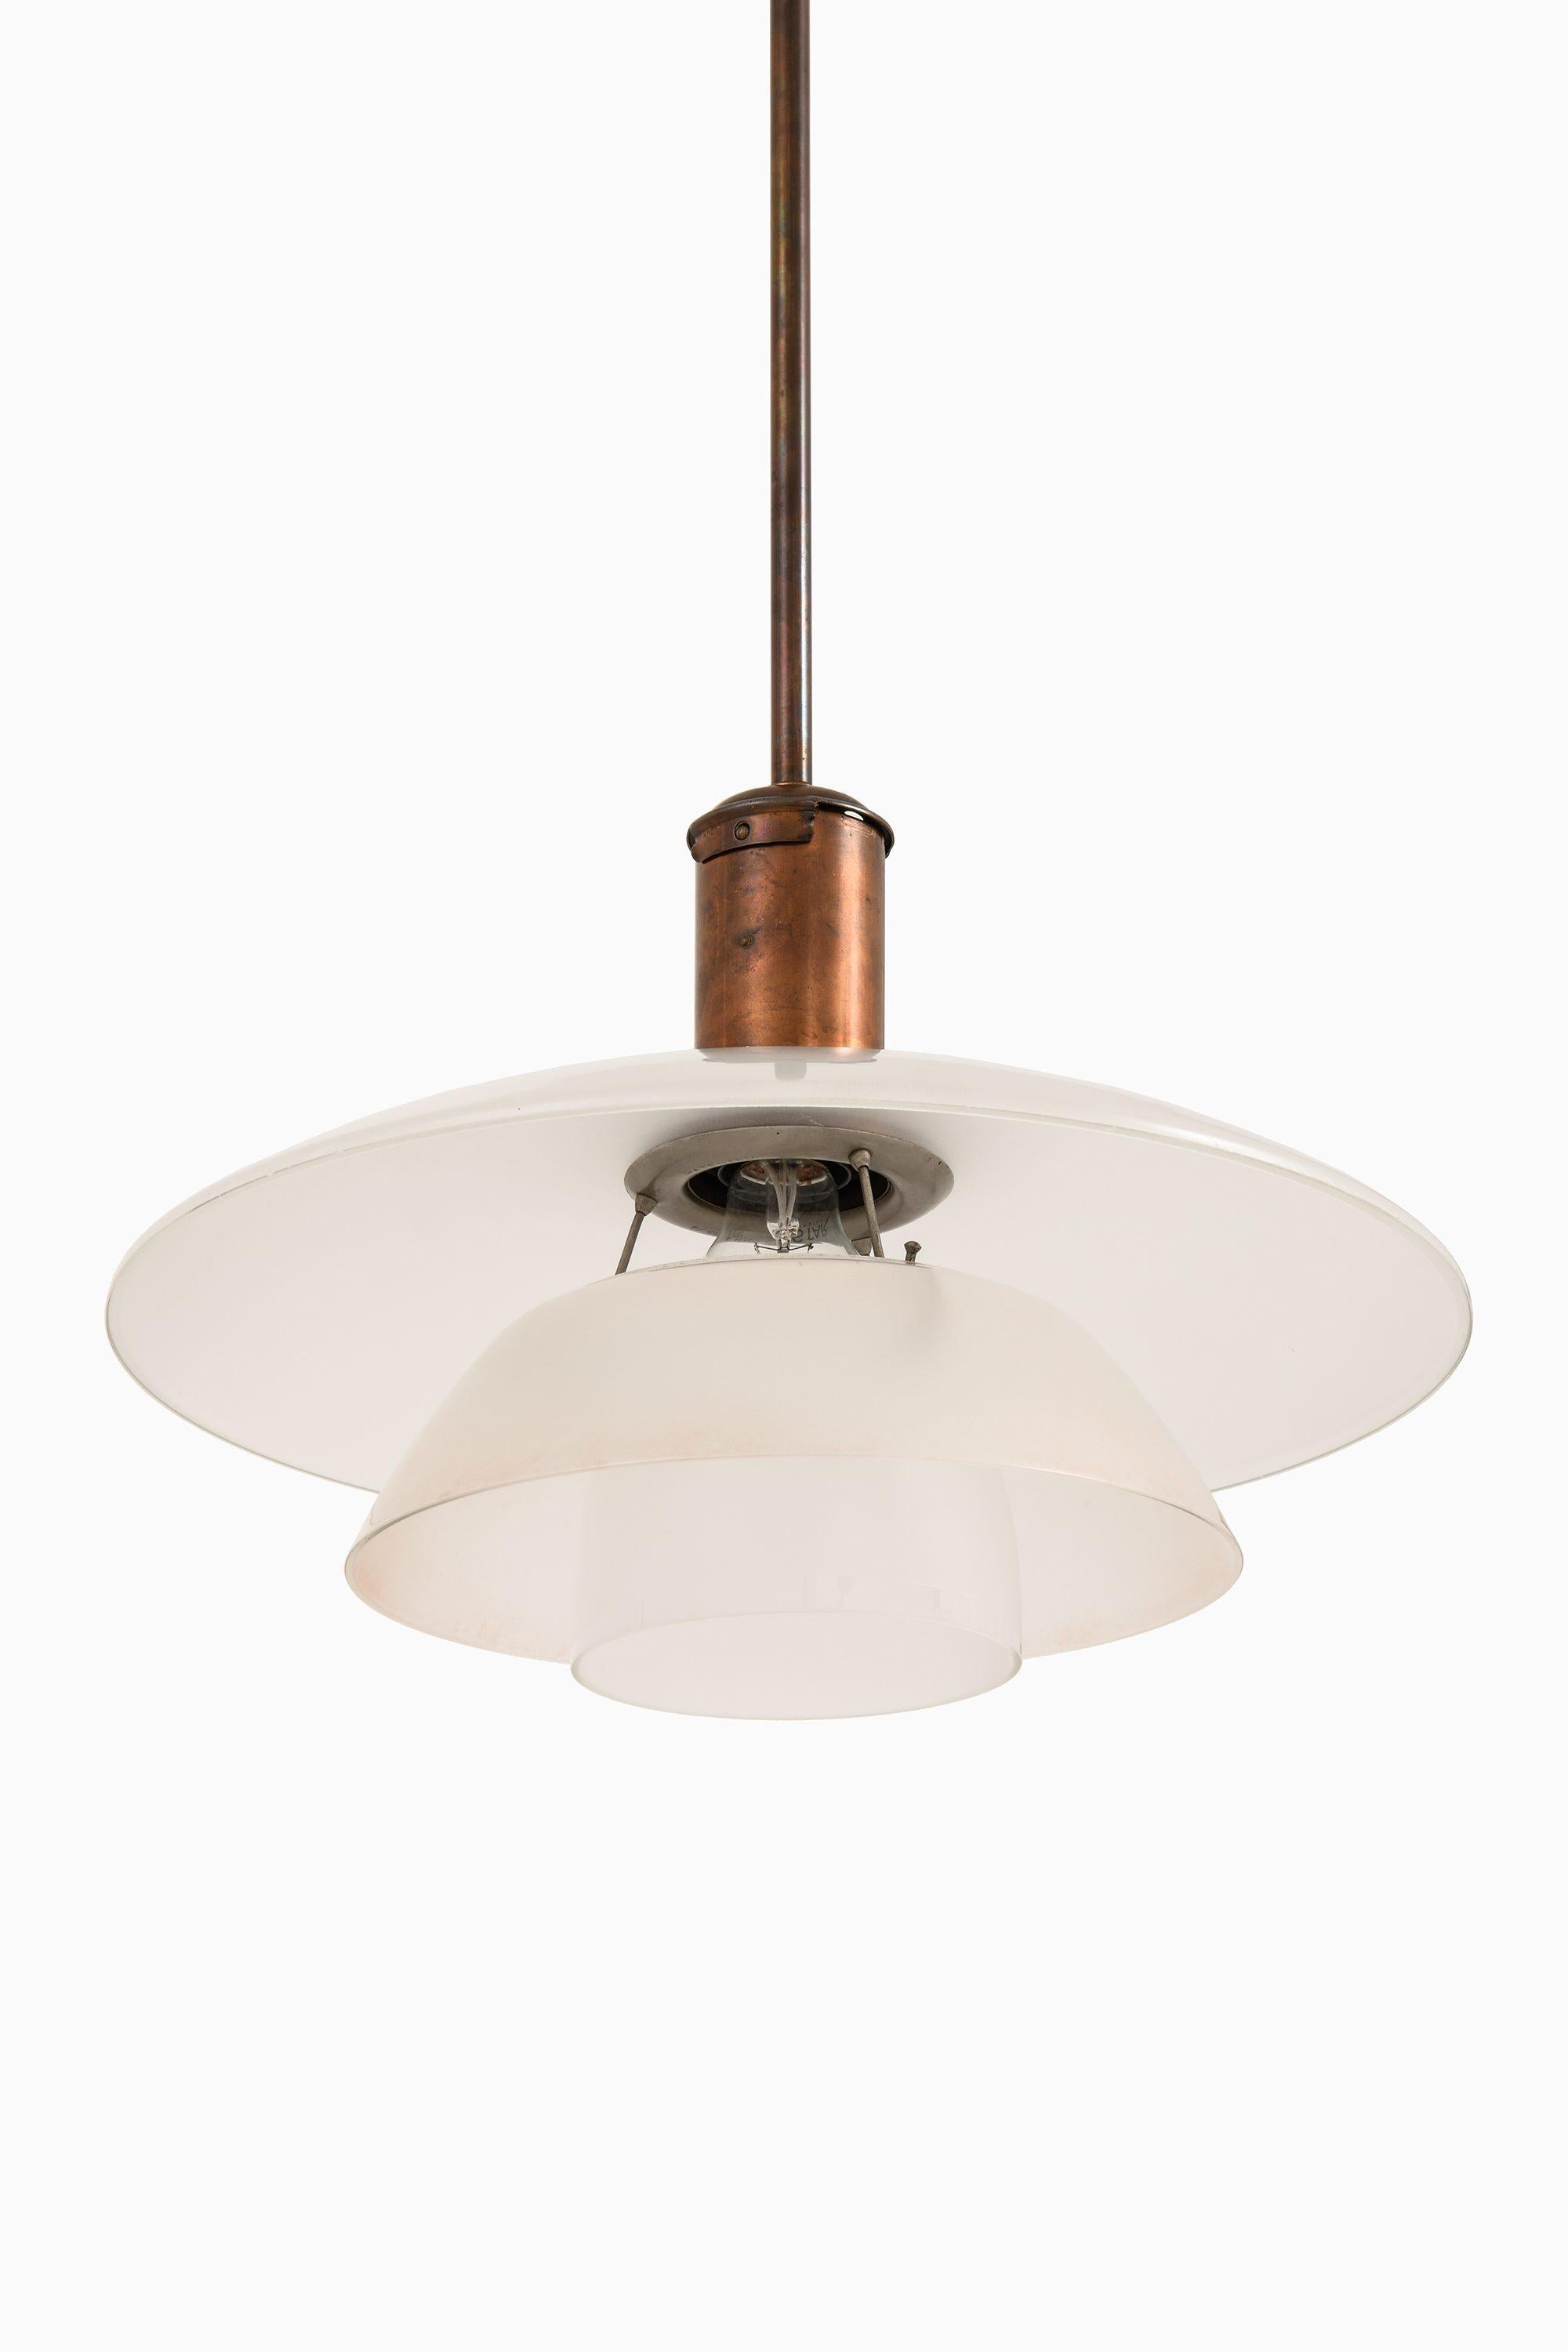 Ceiling Lamp in Copper-Plated Brass and Frosted Glass by Poul Henningsen, 1930's

Additional Information:
Material: Copper-plated brass, frosted glass
Style: Mid century, Scandinavian
Rare ceiling lamp model PH-4/4
Produced by Louis Poulsen in